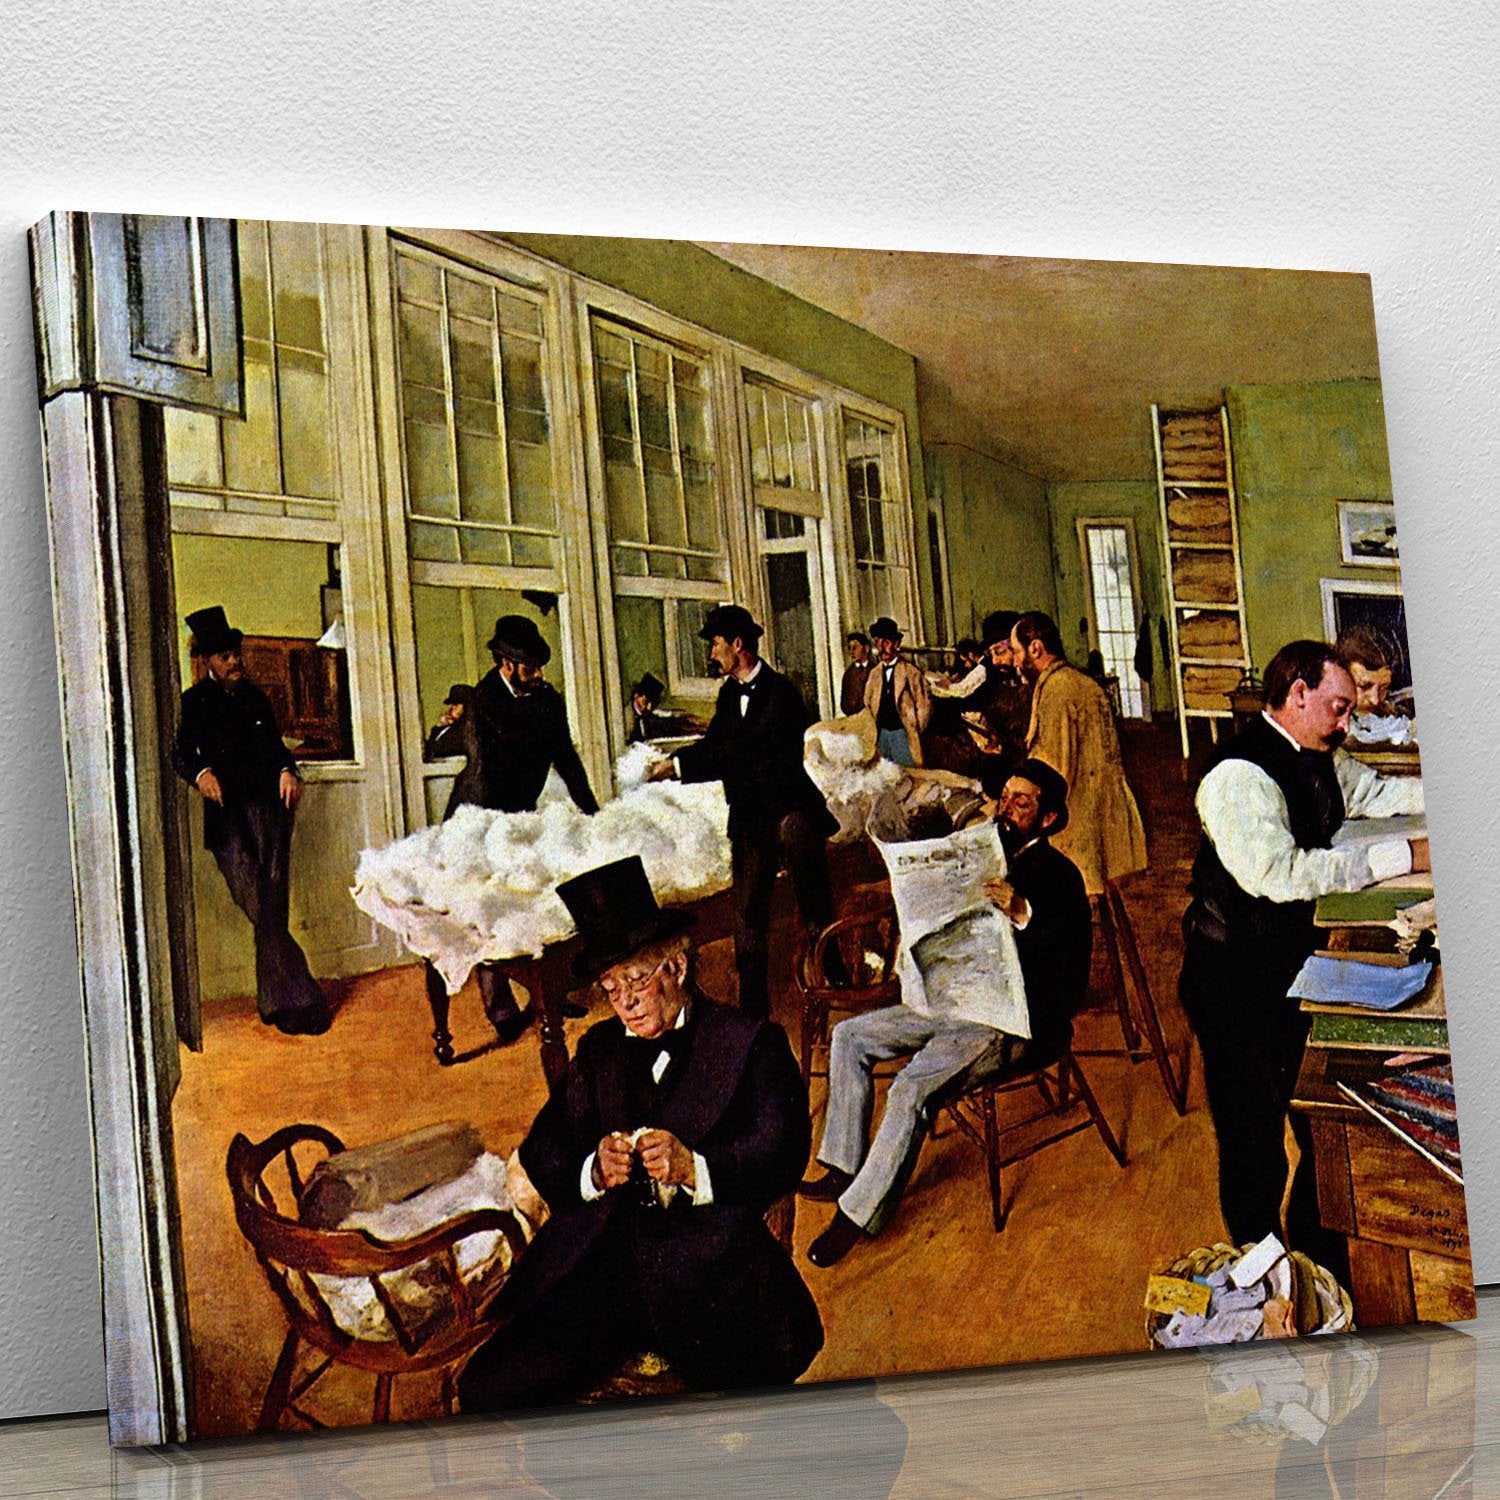 The cotton office in New Orleans by Degas Canvas Print or Poster